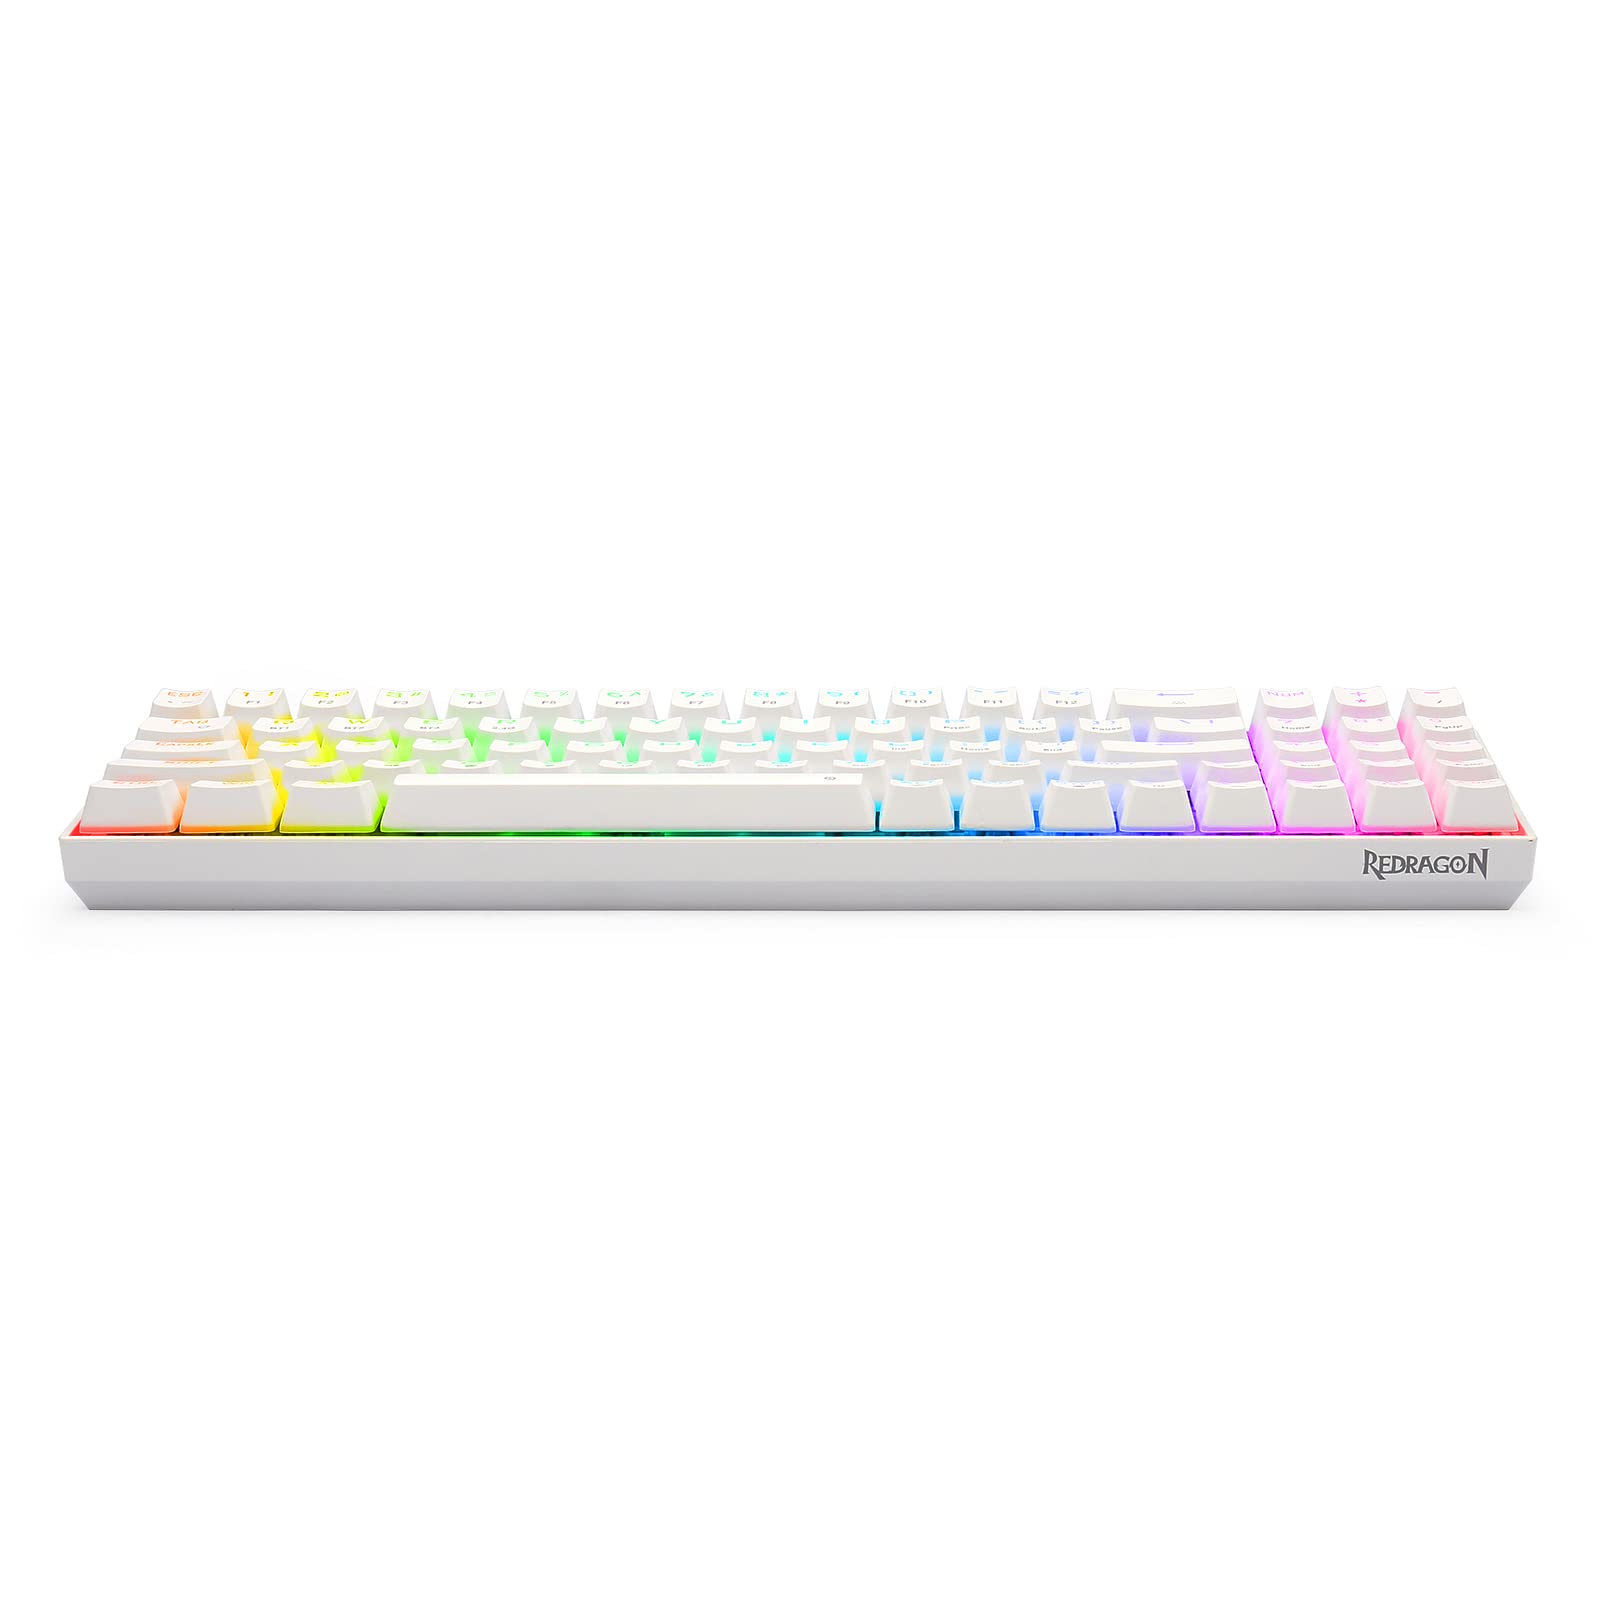 Redragon K627 Pro Mechanical Gaming Keyboard RGB LED Backlit 78 Key Wired/Wireless 2.4G and Bluetooth with Anti-Dust Brown Switches for PC Gamers (White)